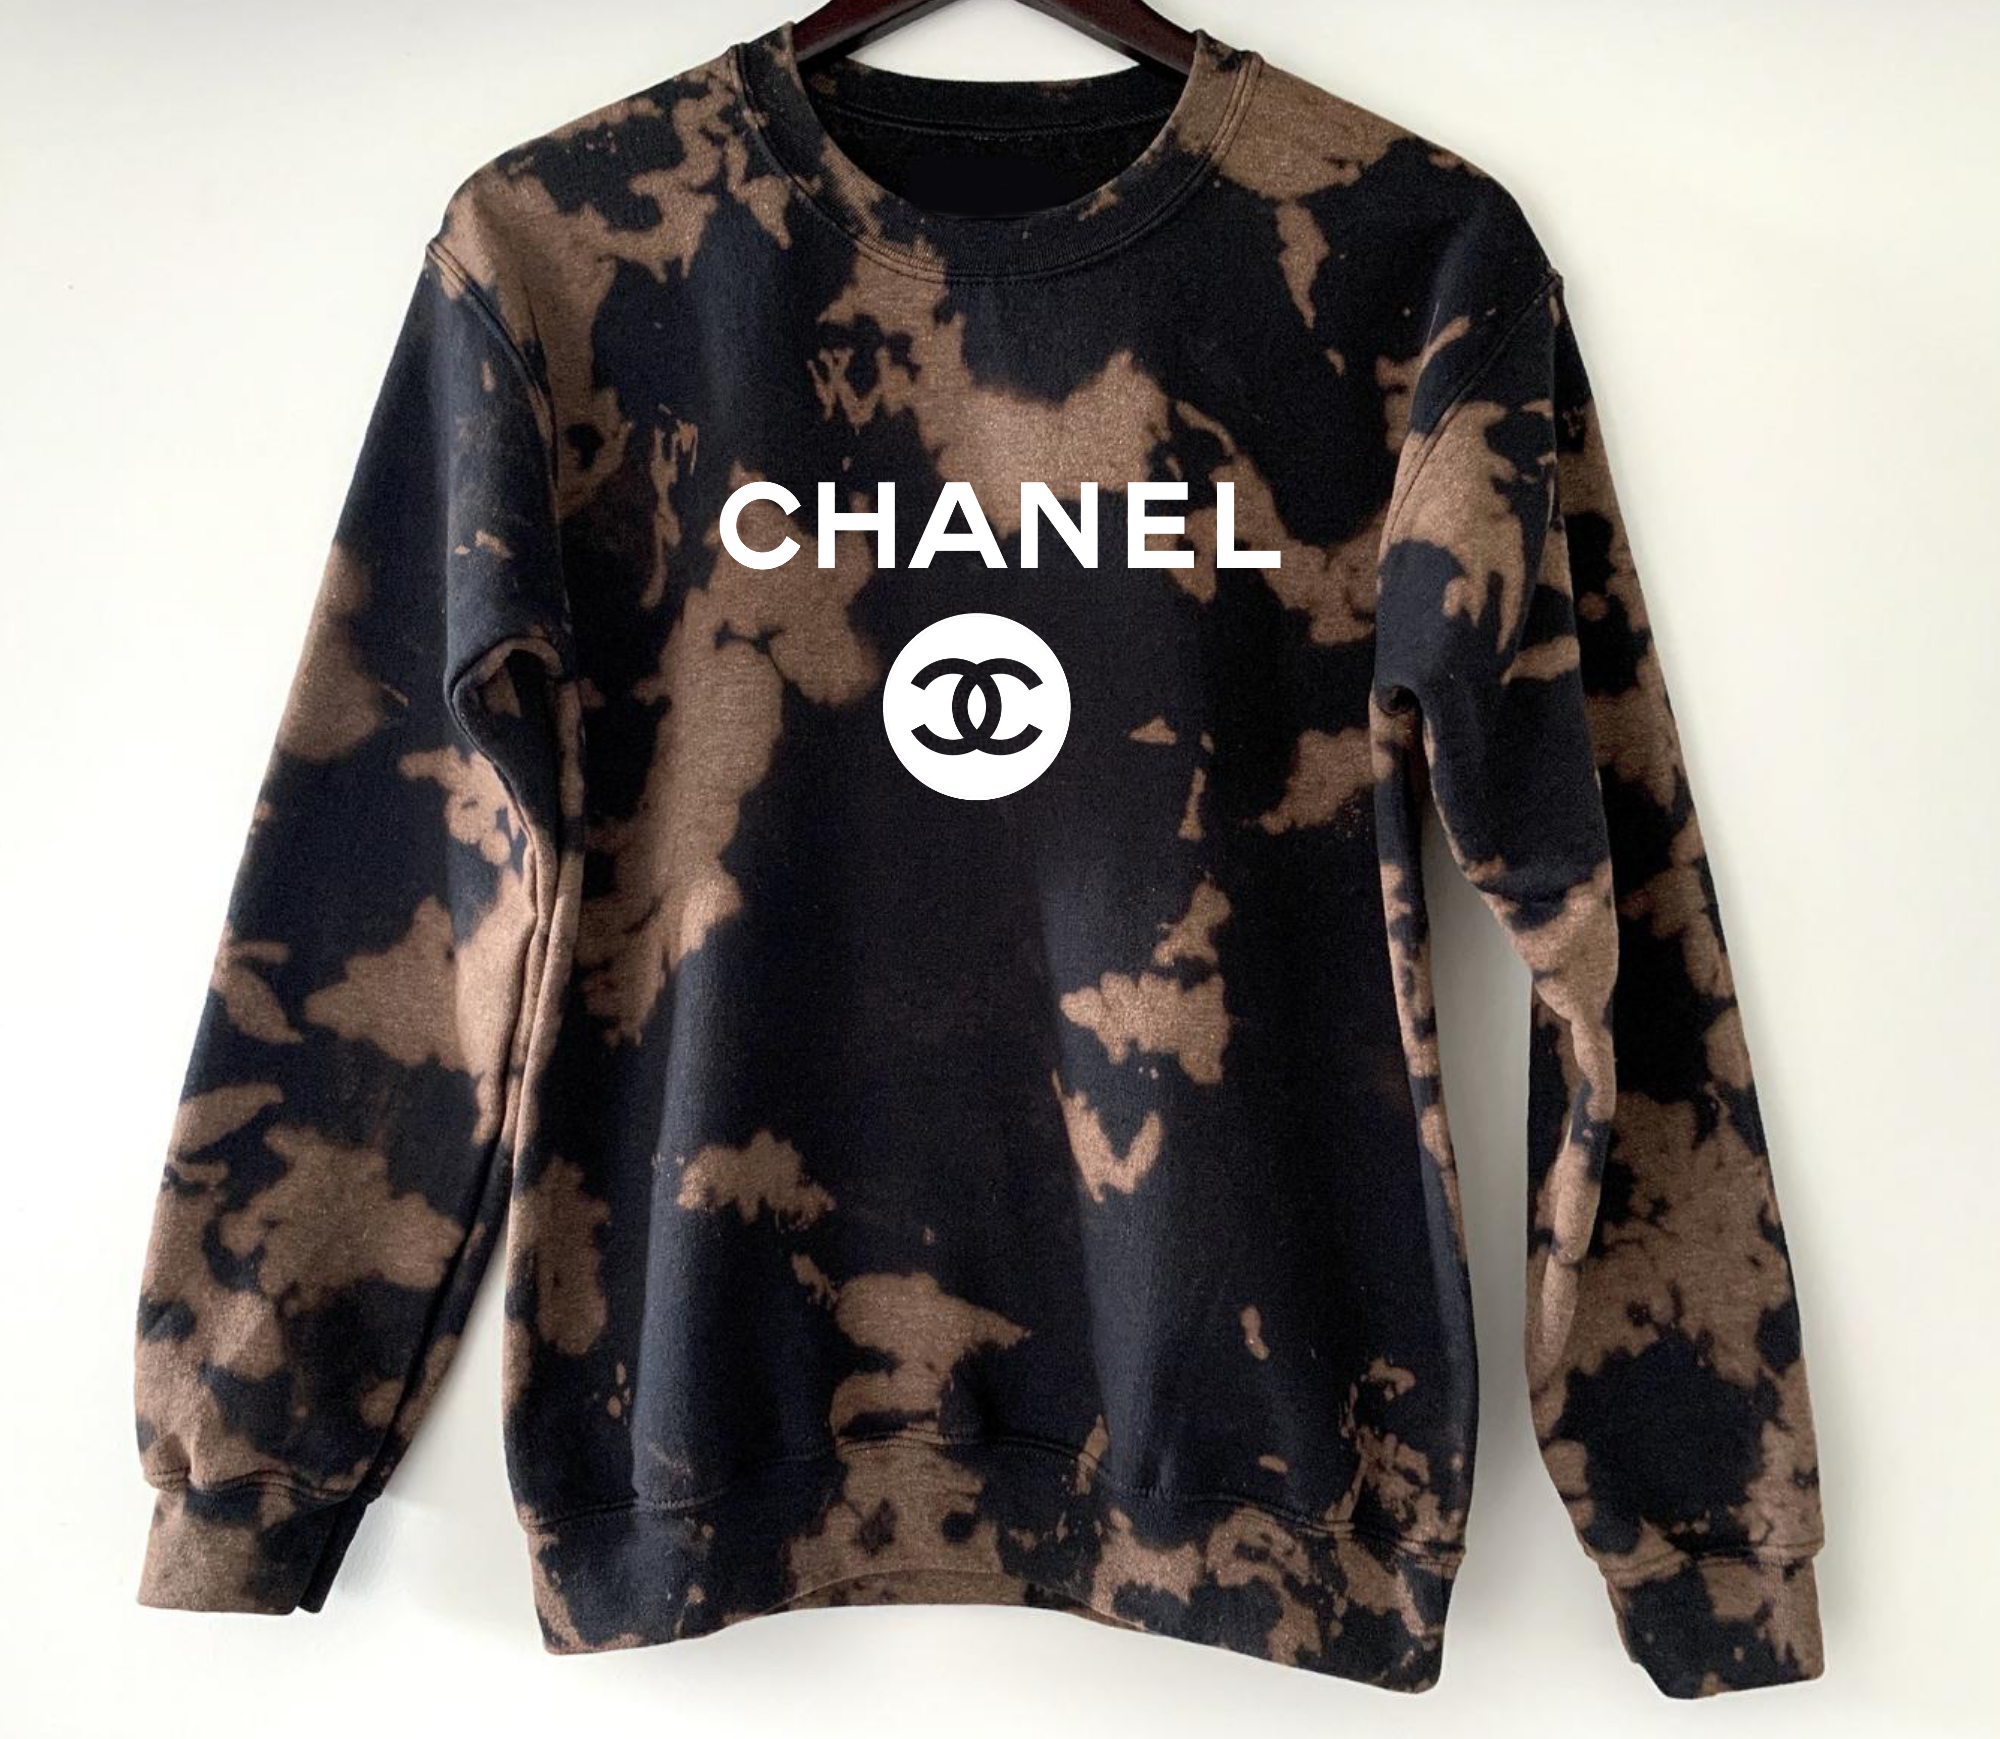 Chanel Inspired crewneck  Chanel inspired, Crew neck, Chanel